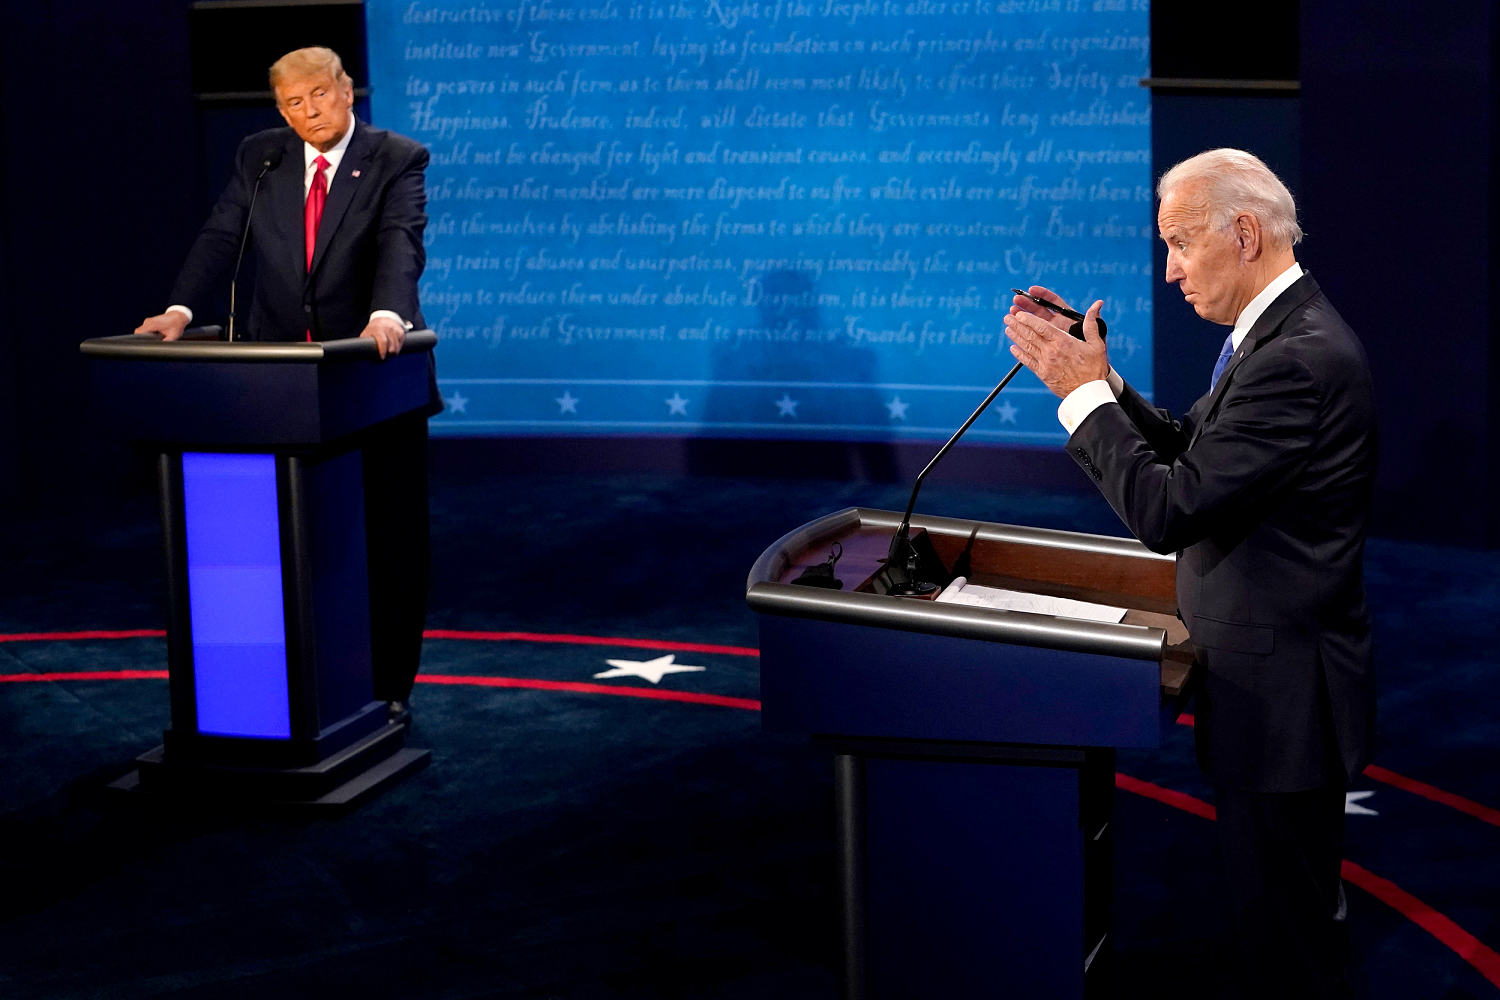 Biden and Trump agree to debates in late June and September